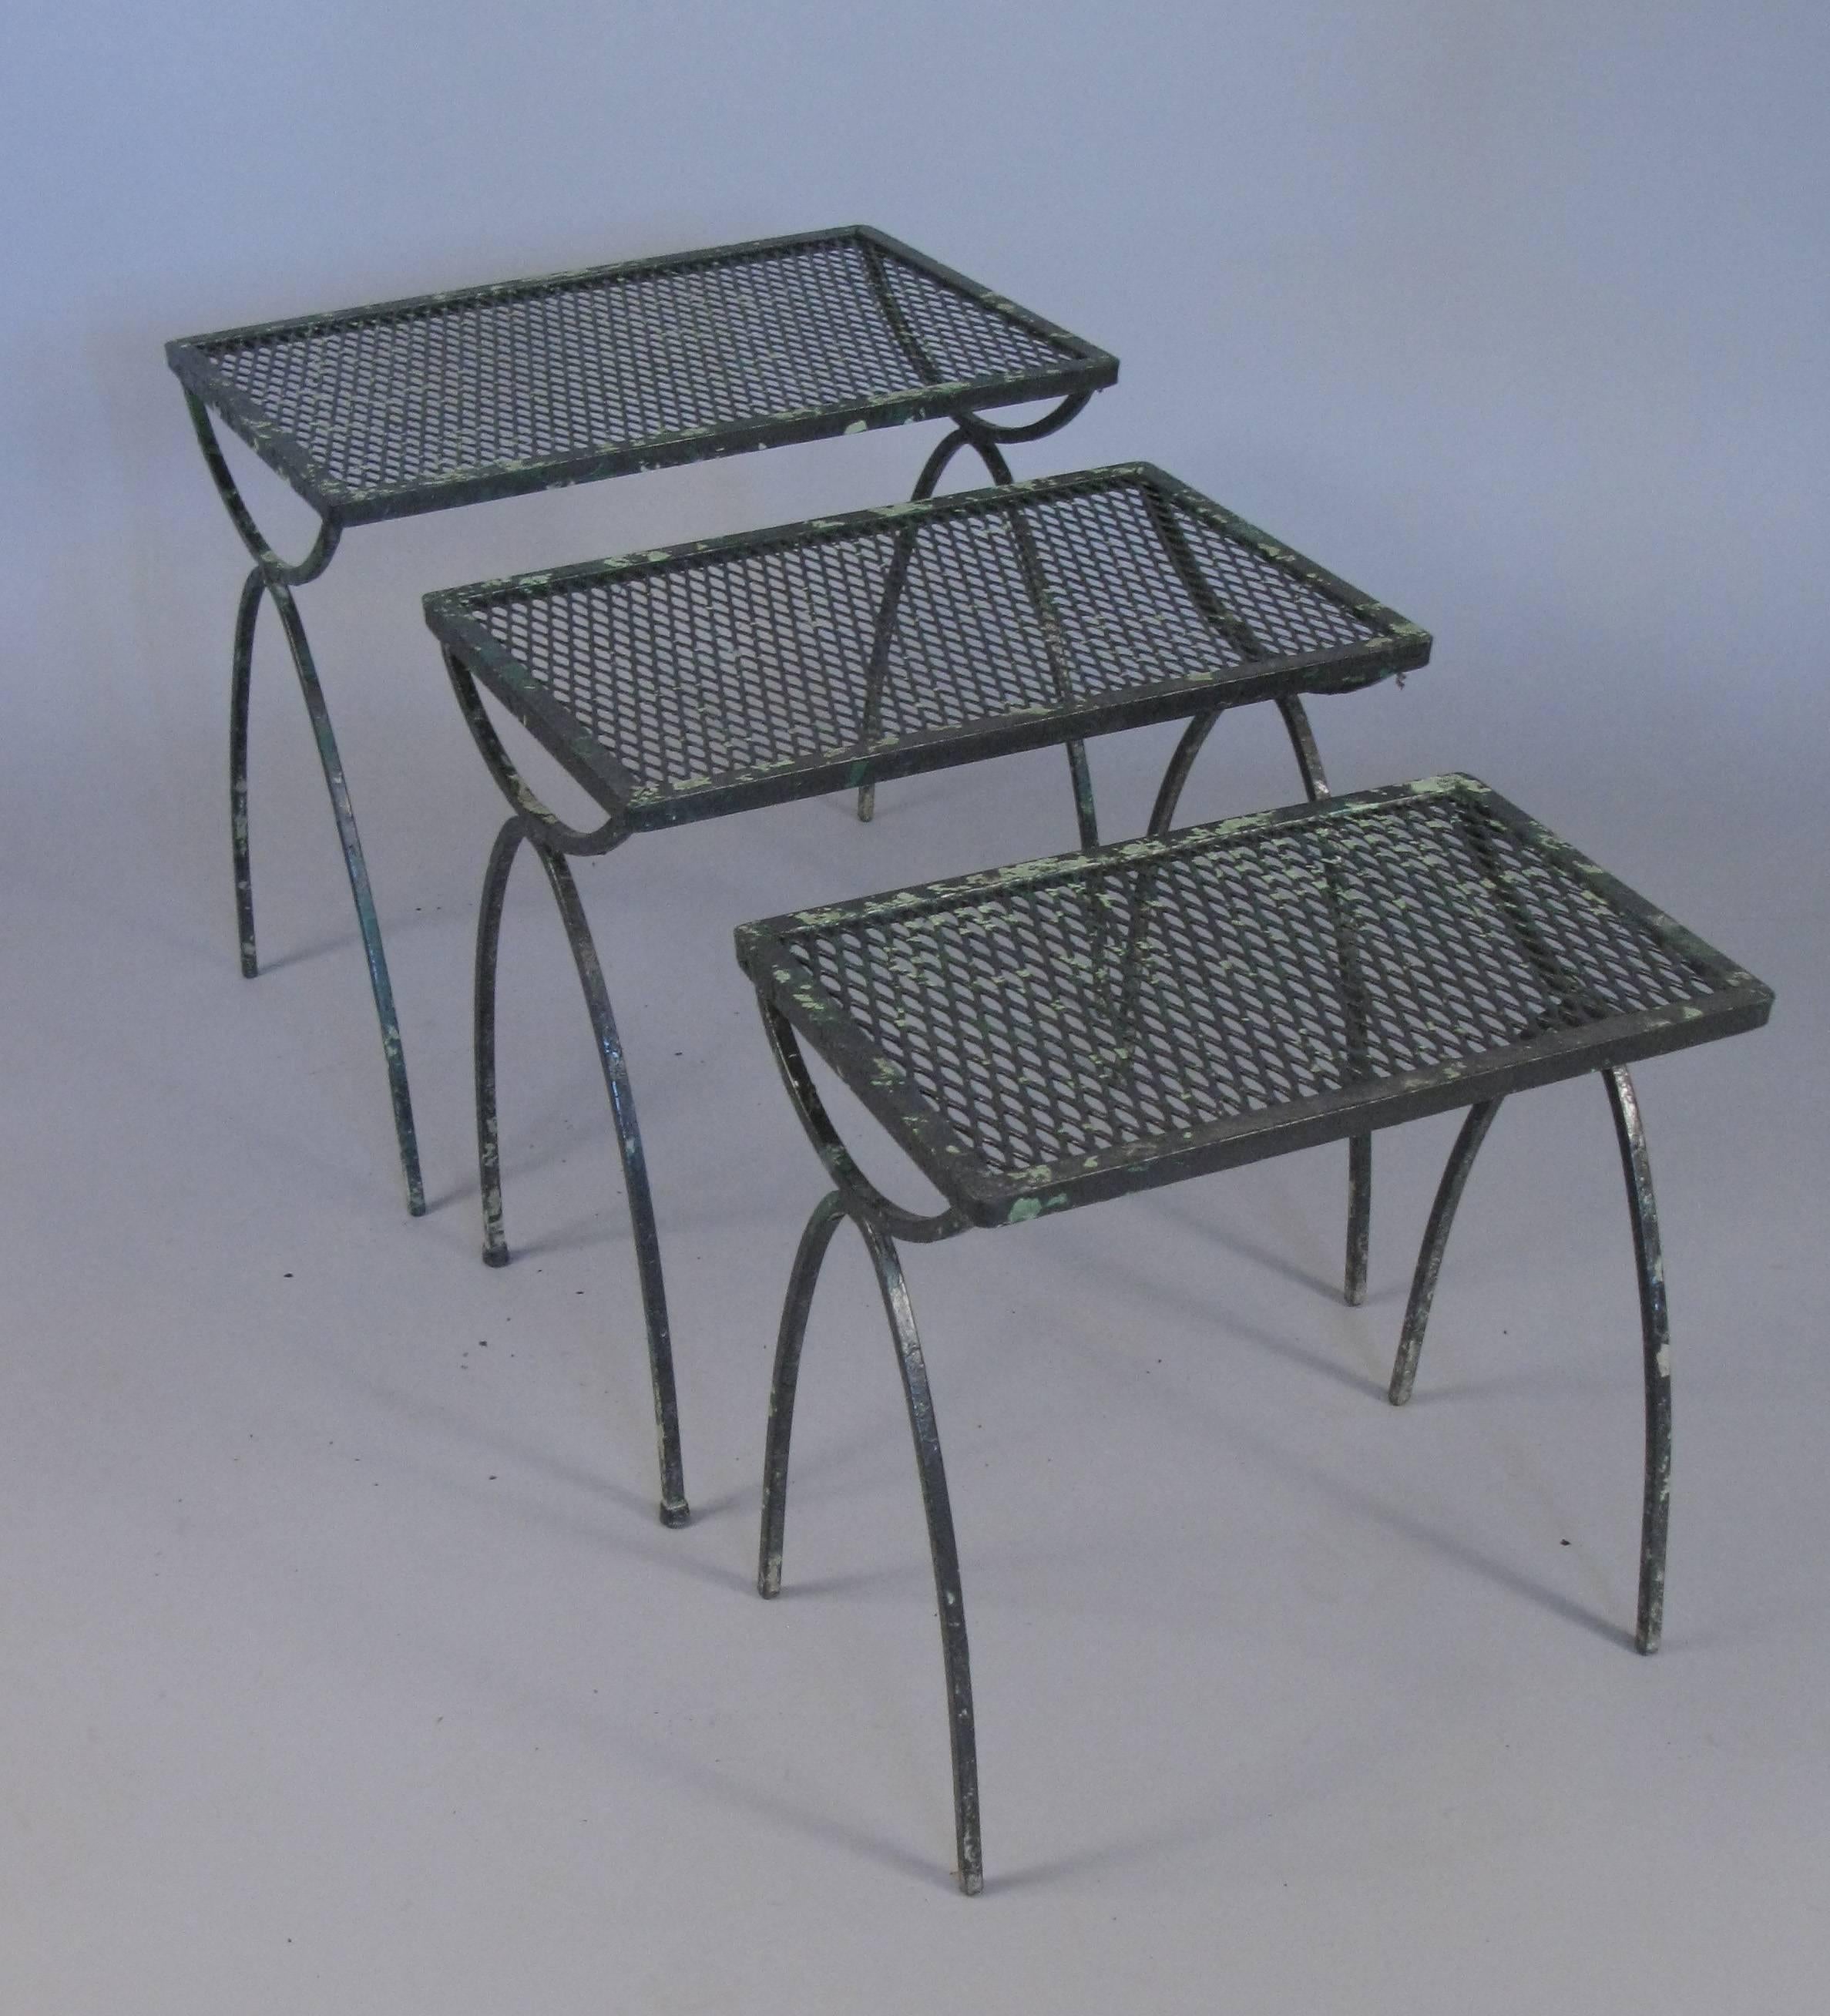 A set of three vintage 1950s wrought iron nesting tables by Salterini from the radar collection. Rectangular surfaces with tall curved legs, they go perfectly with a variety of vintage garden furniture. They are in a black finish over several layers